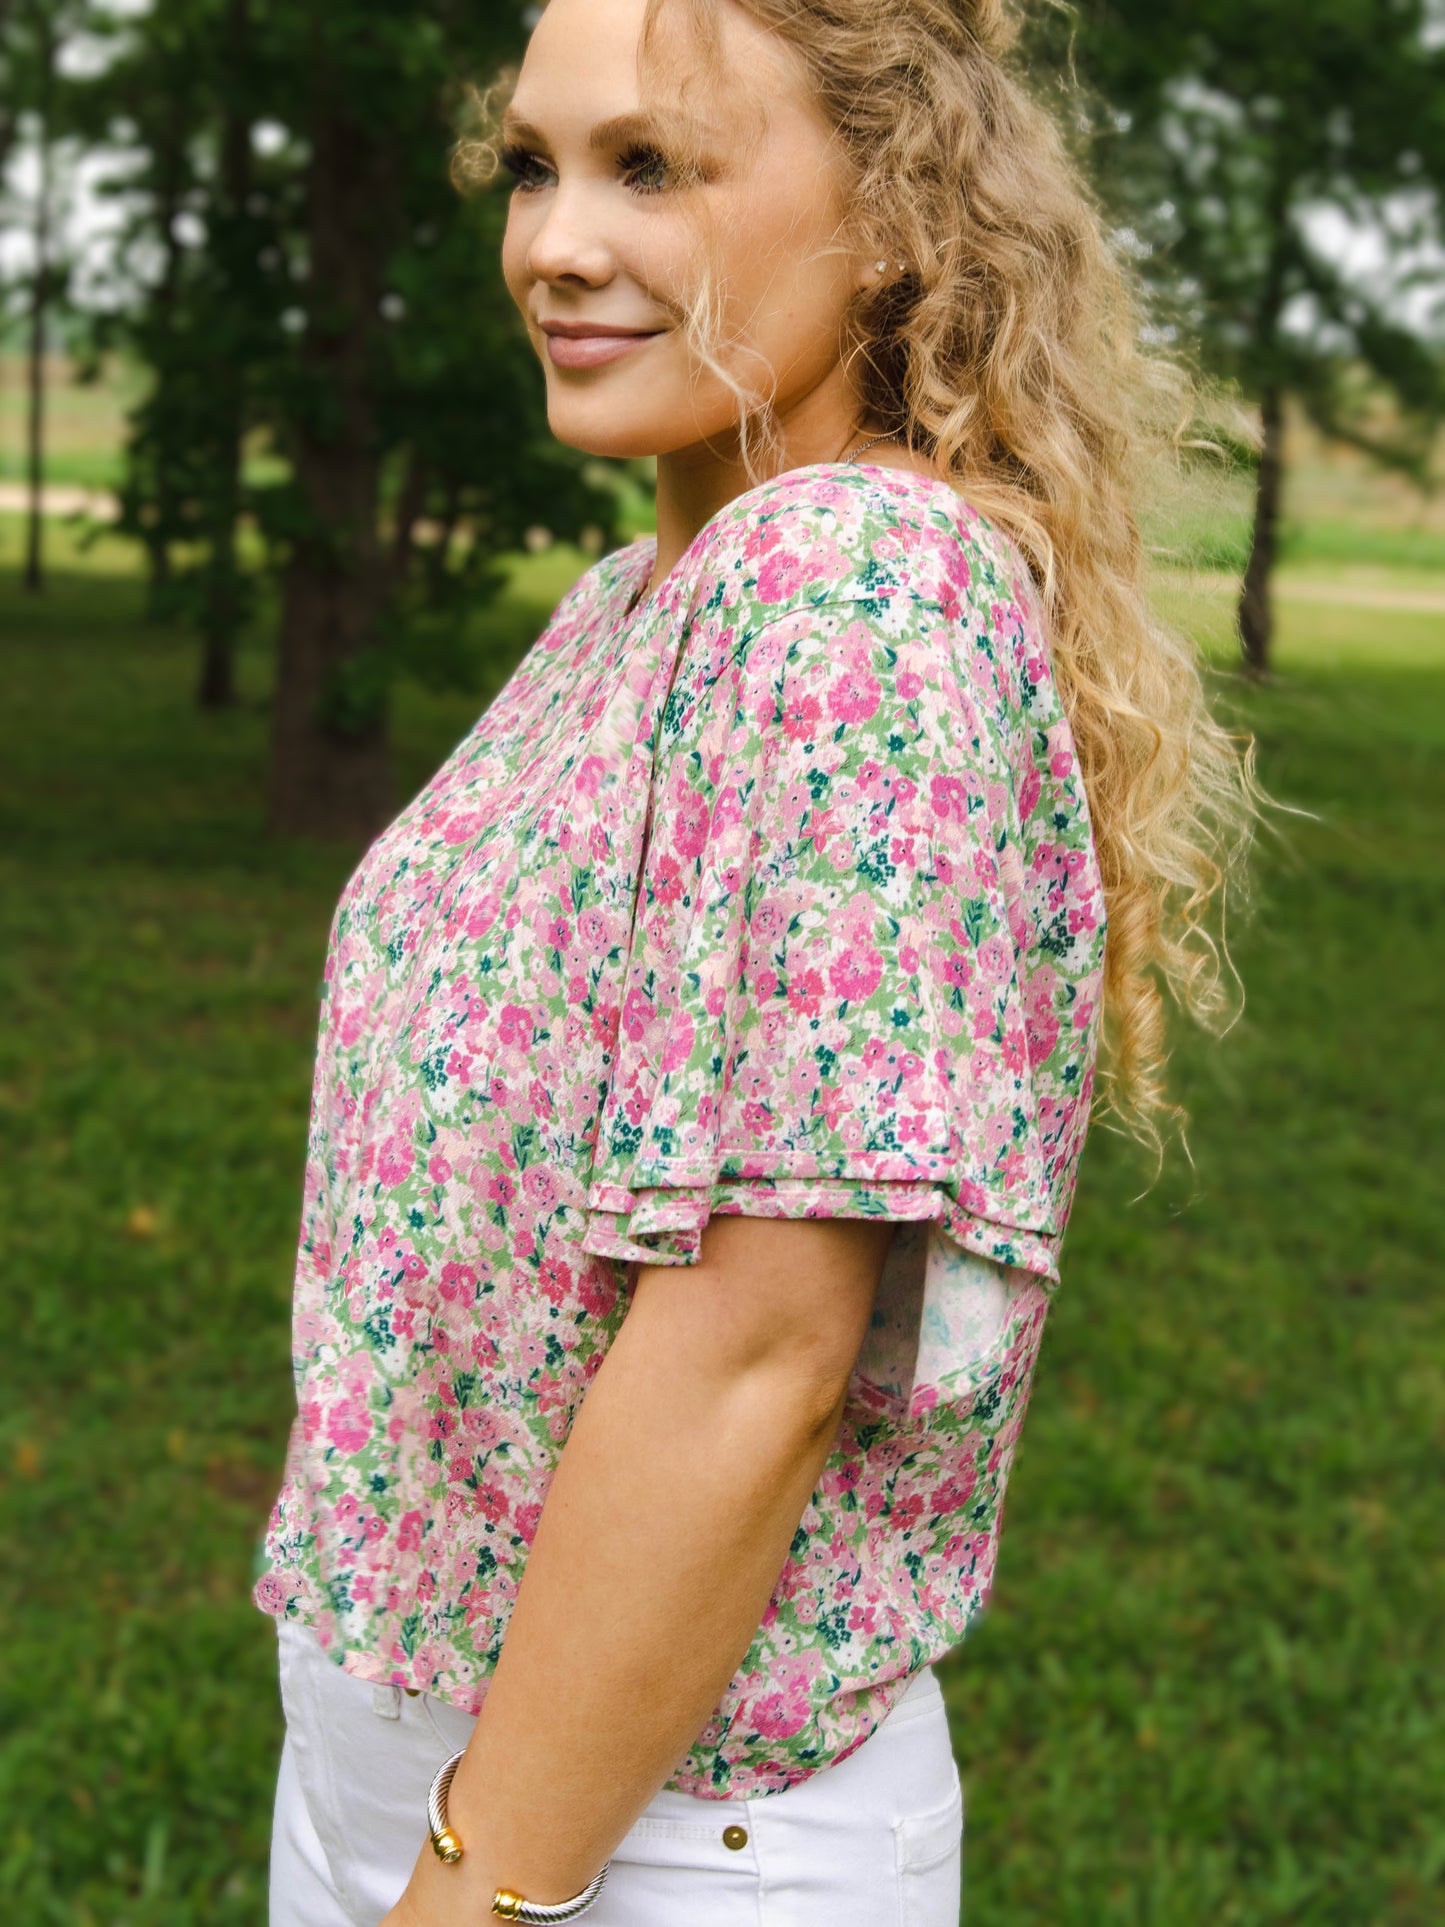 This image of a woman features the product Classic Flutter Top - Joyful. This top has a keyhole back and flowy double ruffle sleeves. It is a pink and green floral pattern.